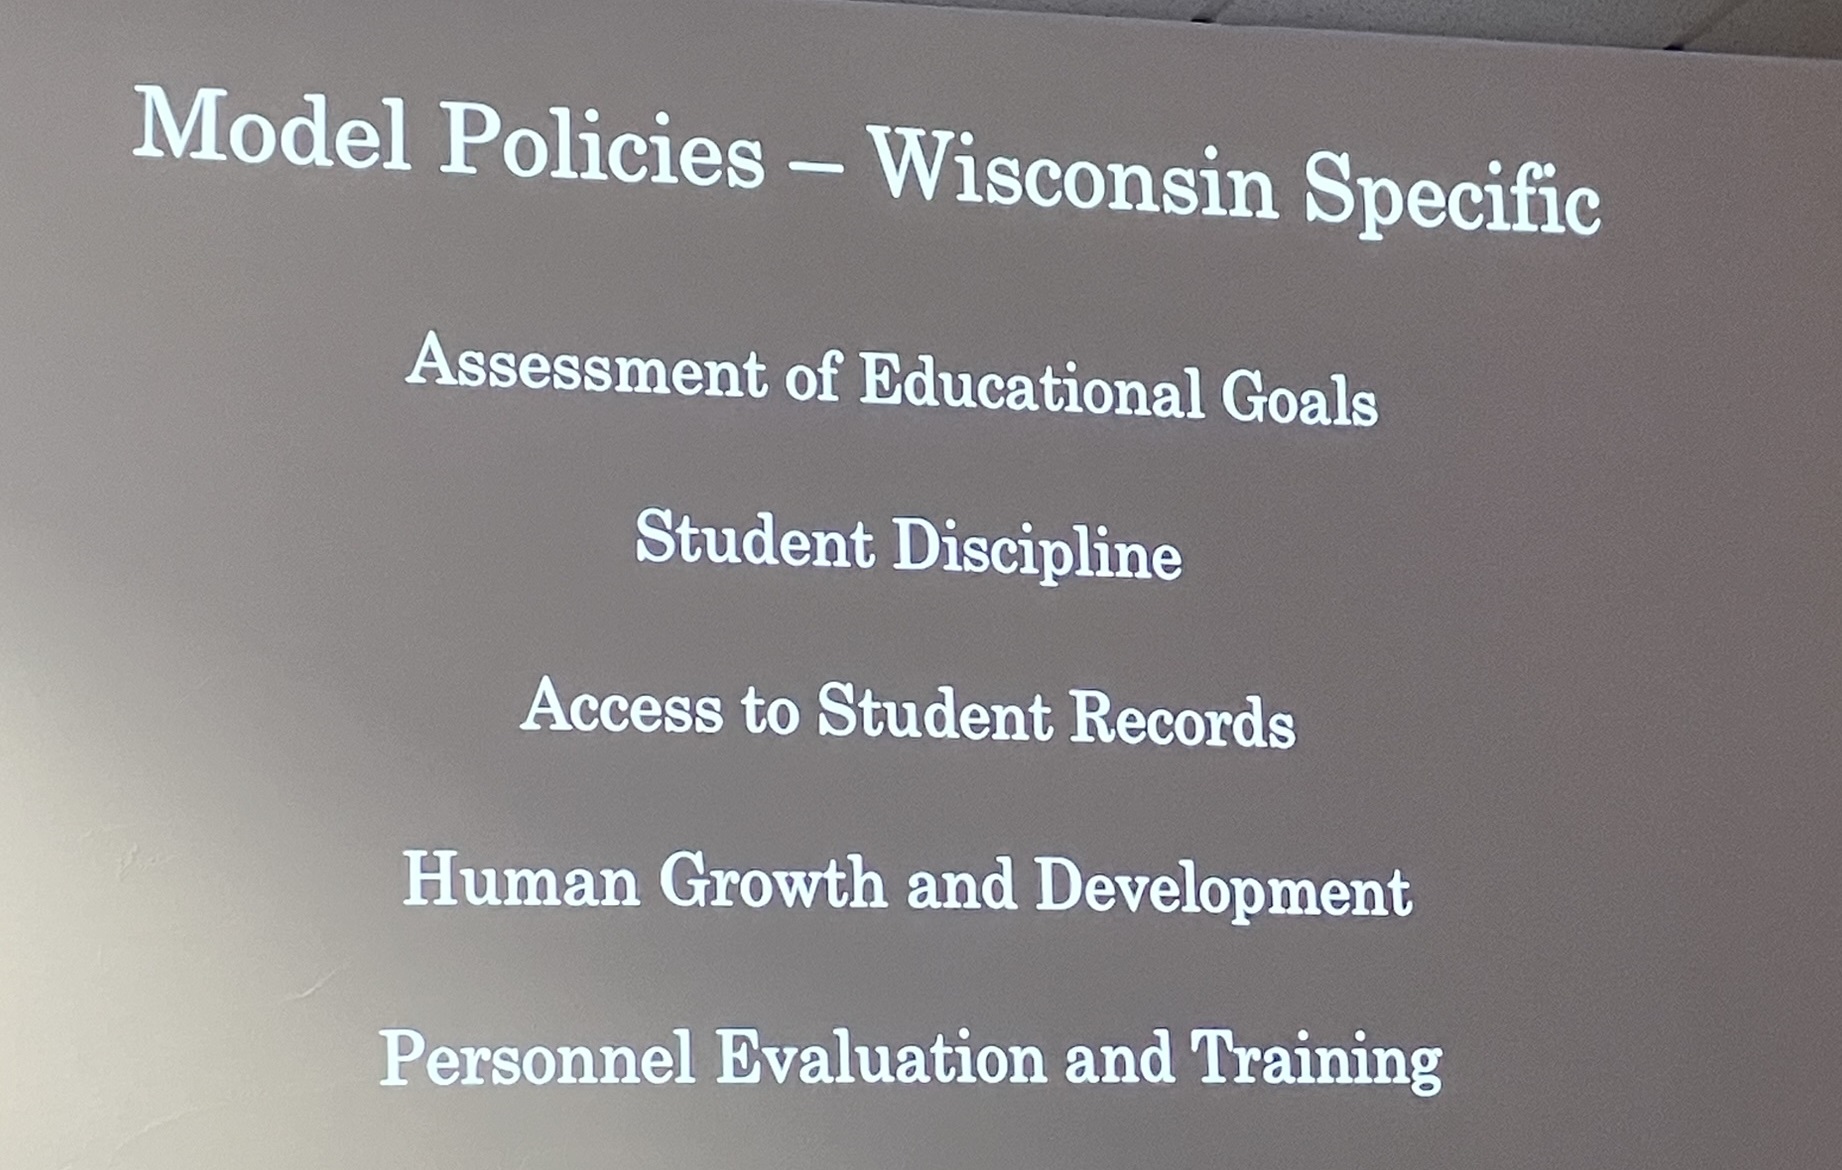 Cory Brewer of the Wisconsin Institute for Law & Liberty discussed the Wisconsin-specific model policies offered by WILL.